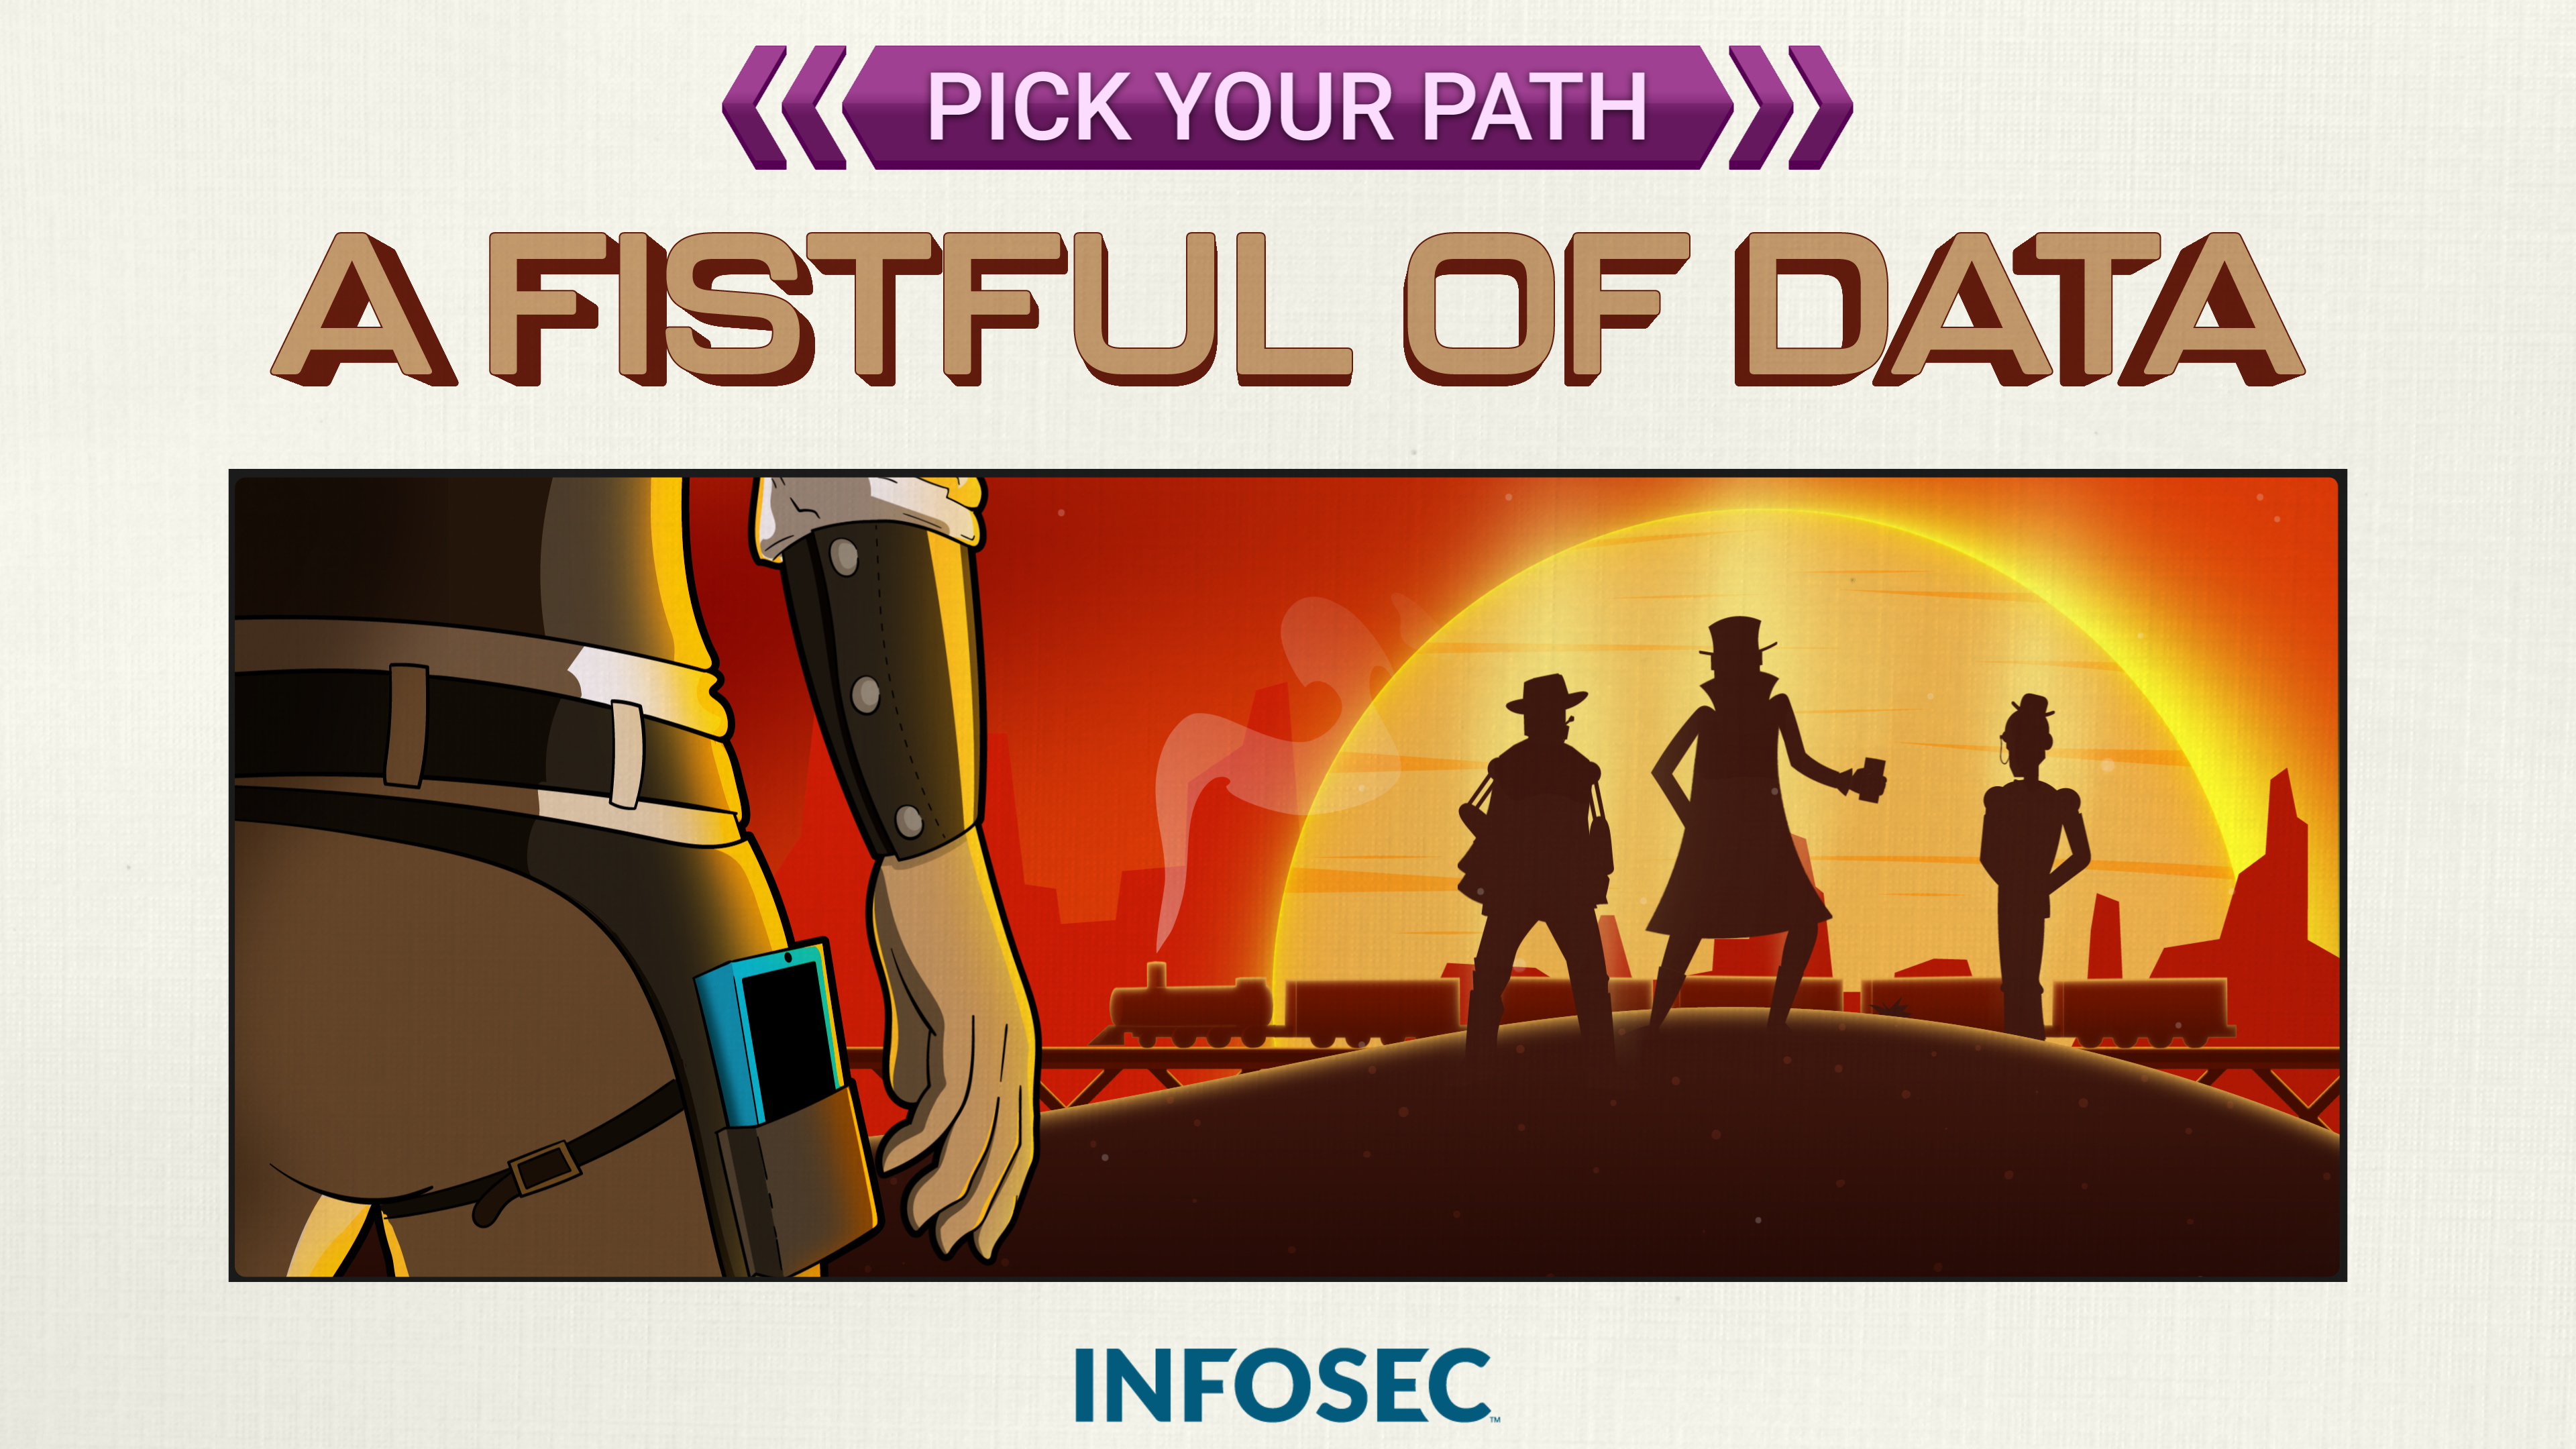 Pick Your Path: A Fistful of Data